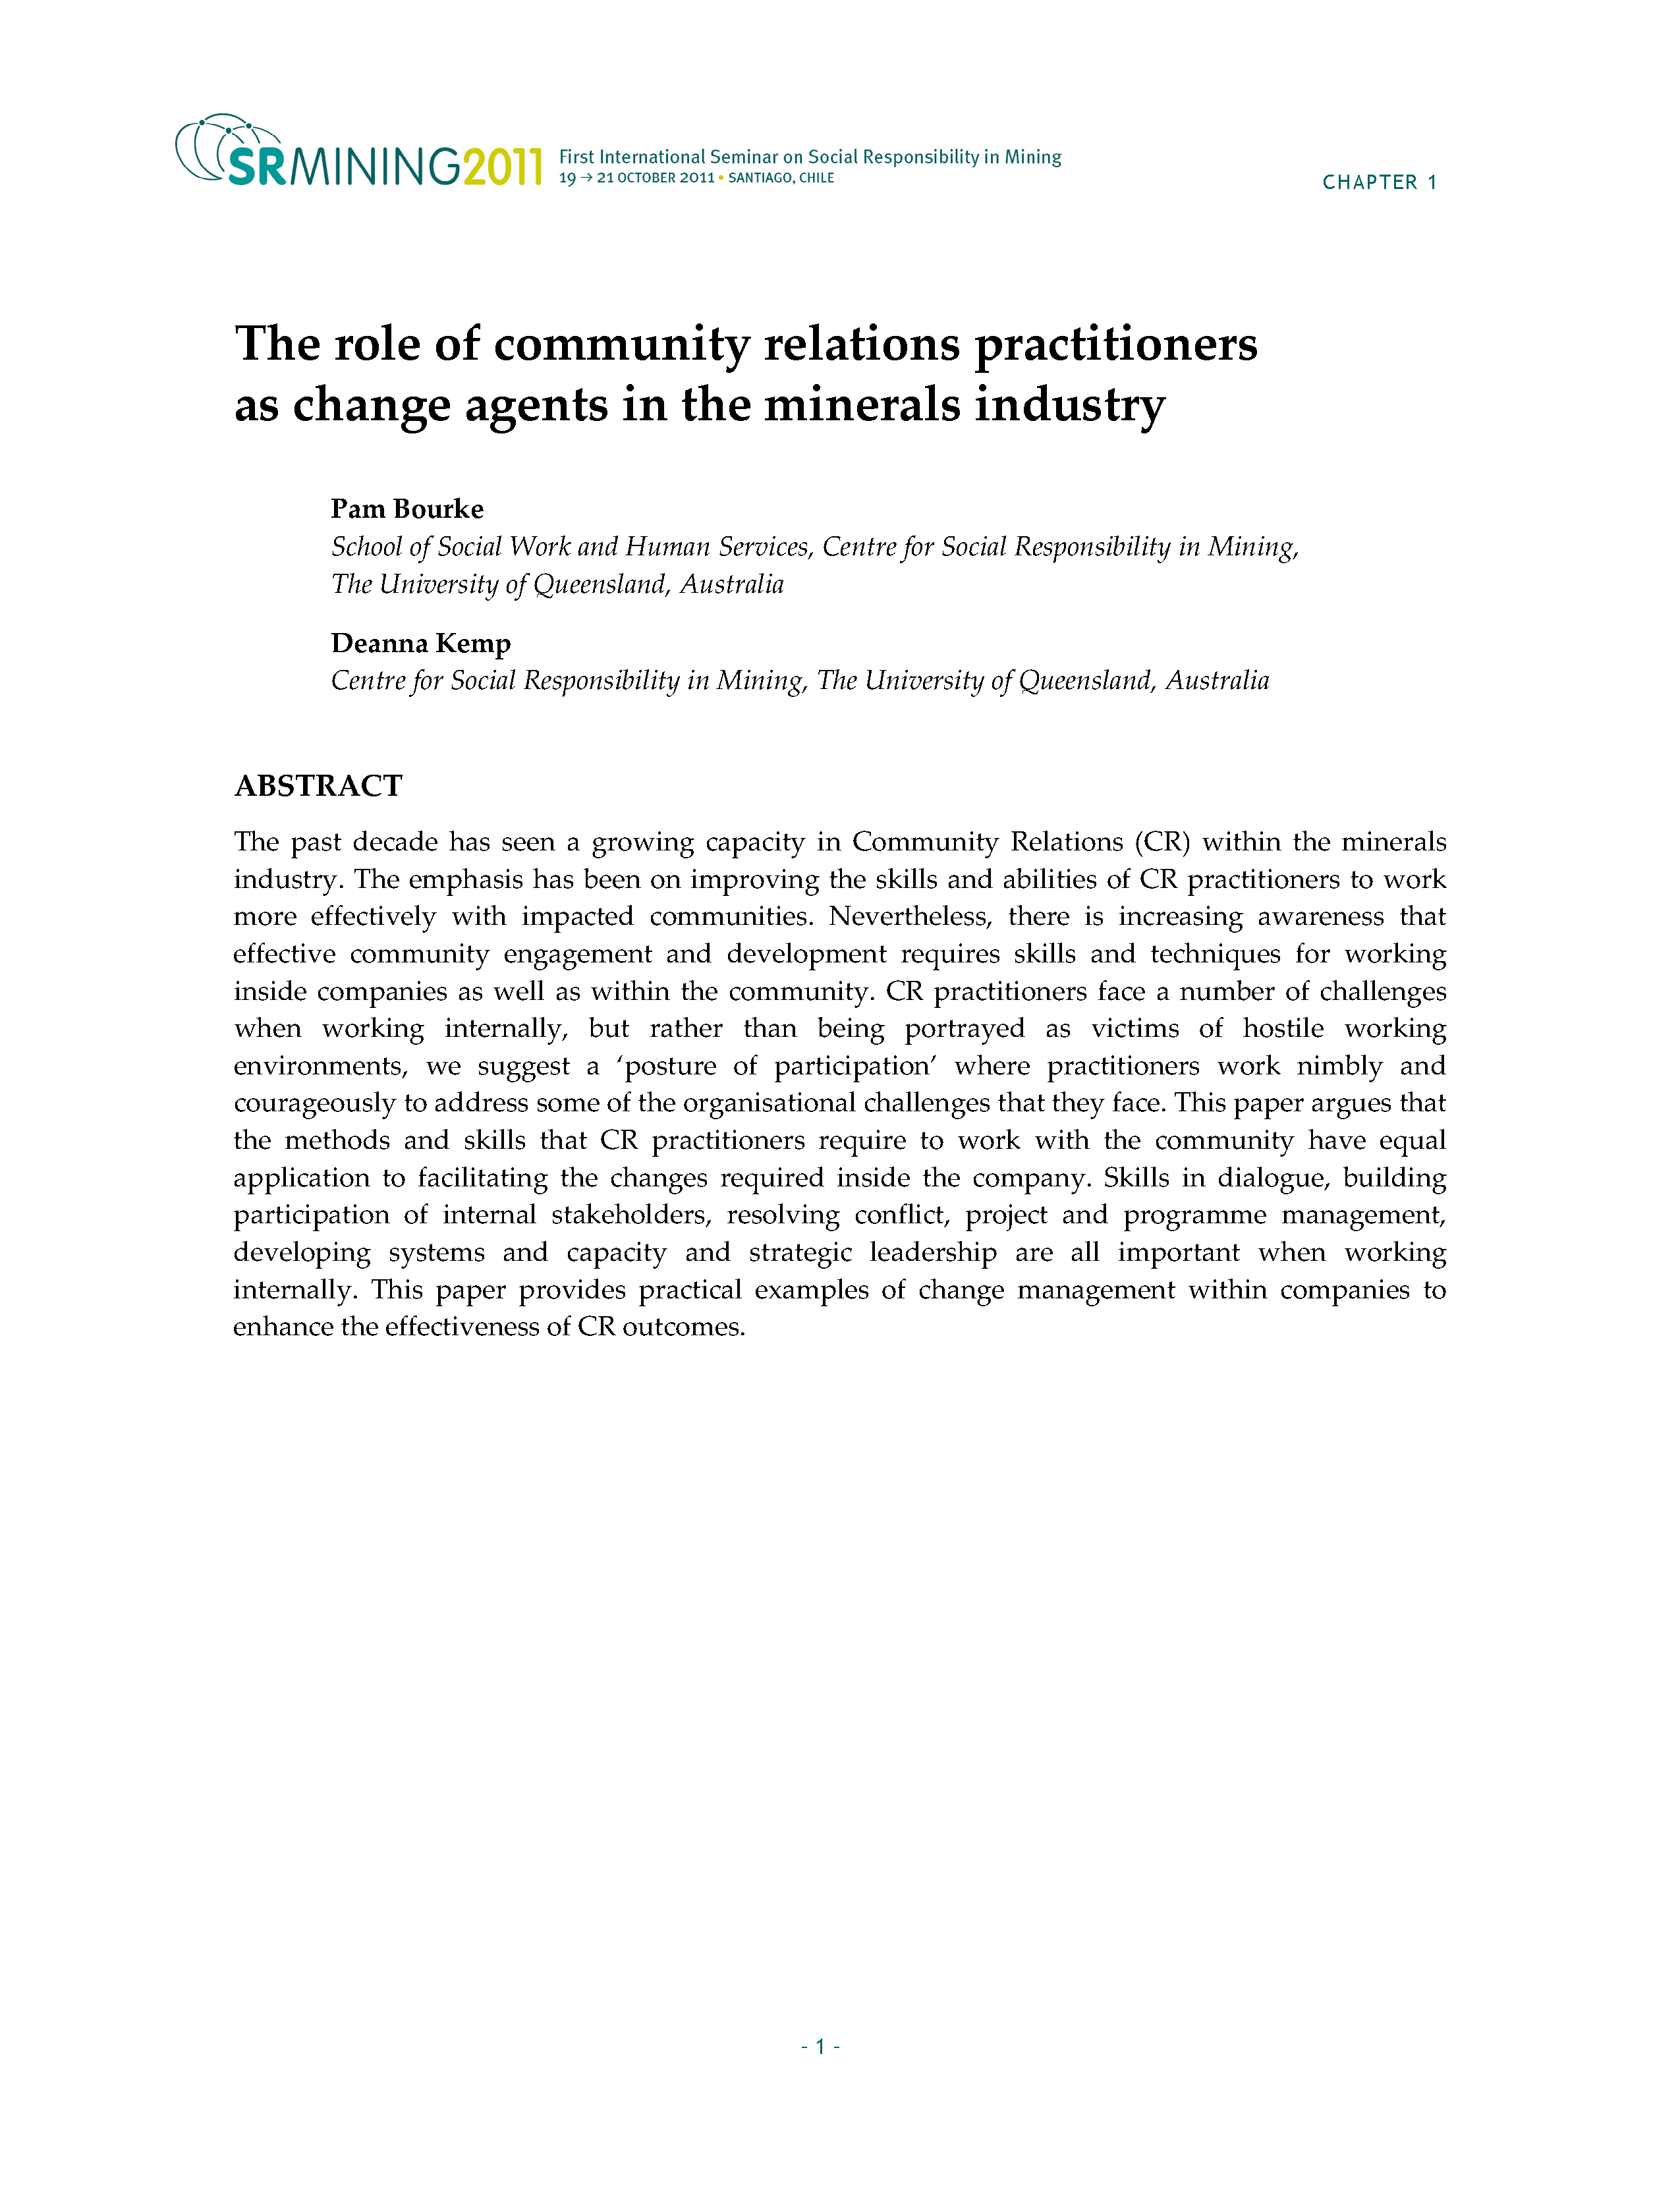 The role of community relations practitioners as change agents in the minerals industry